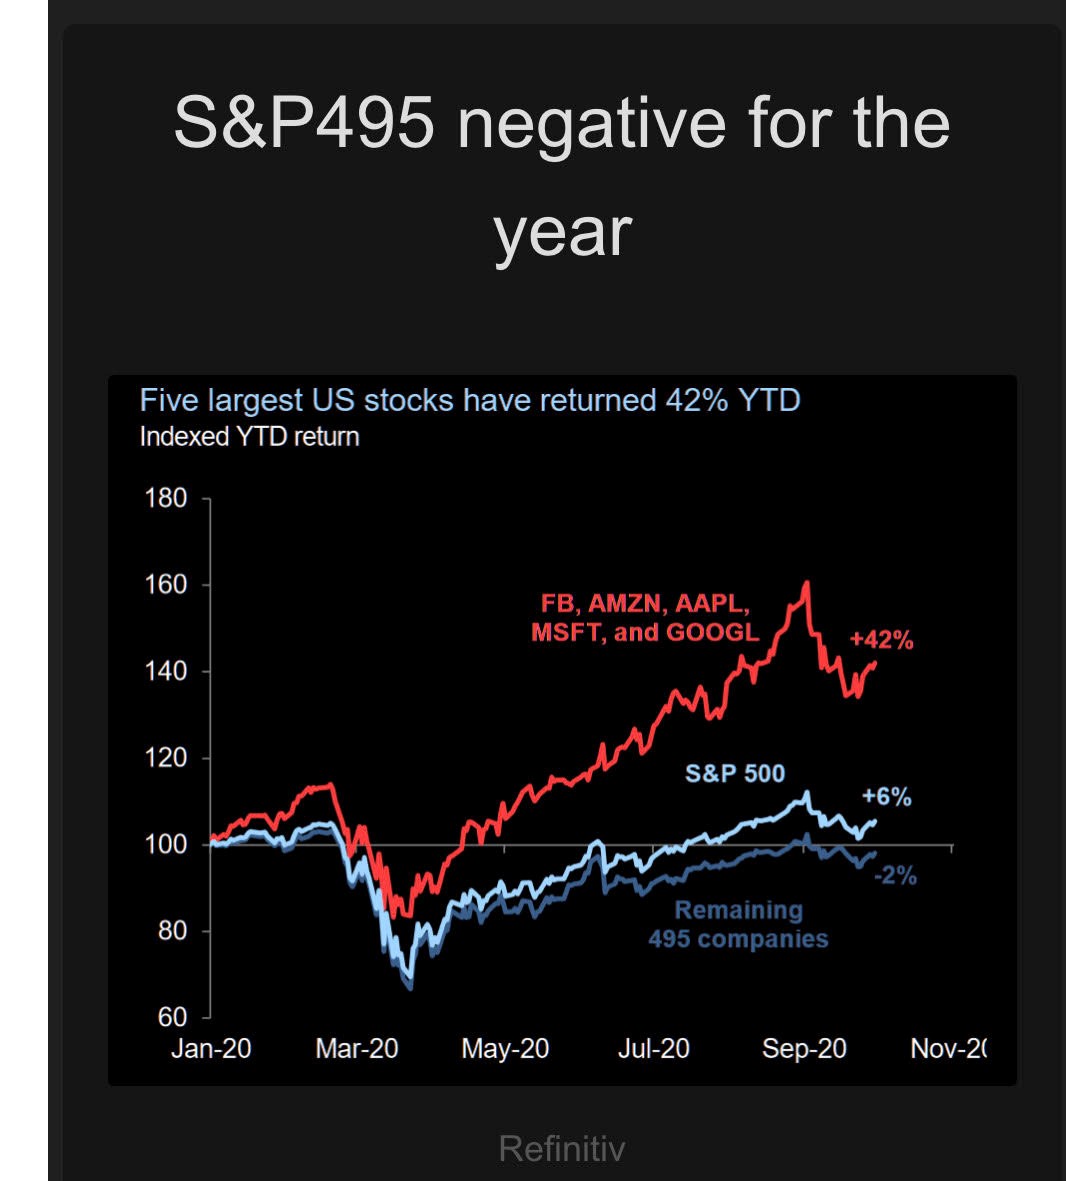 Performance of the S&P500 vs FAMAG vs the S&P495.